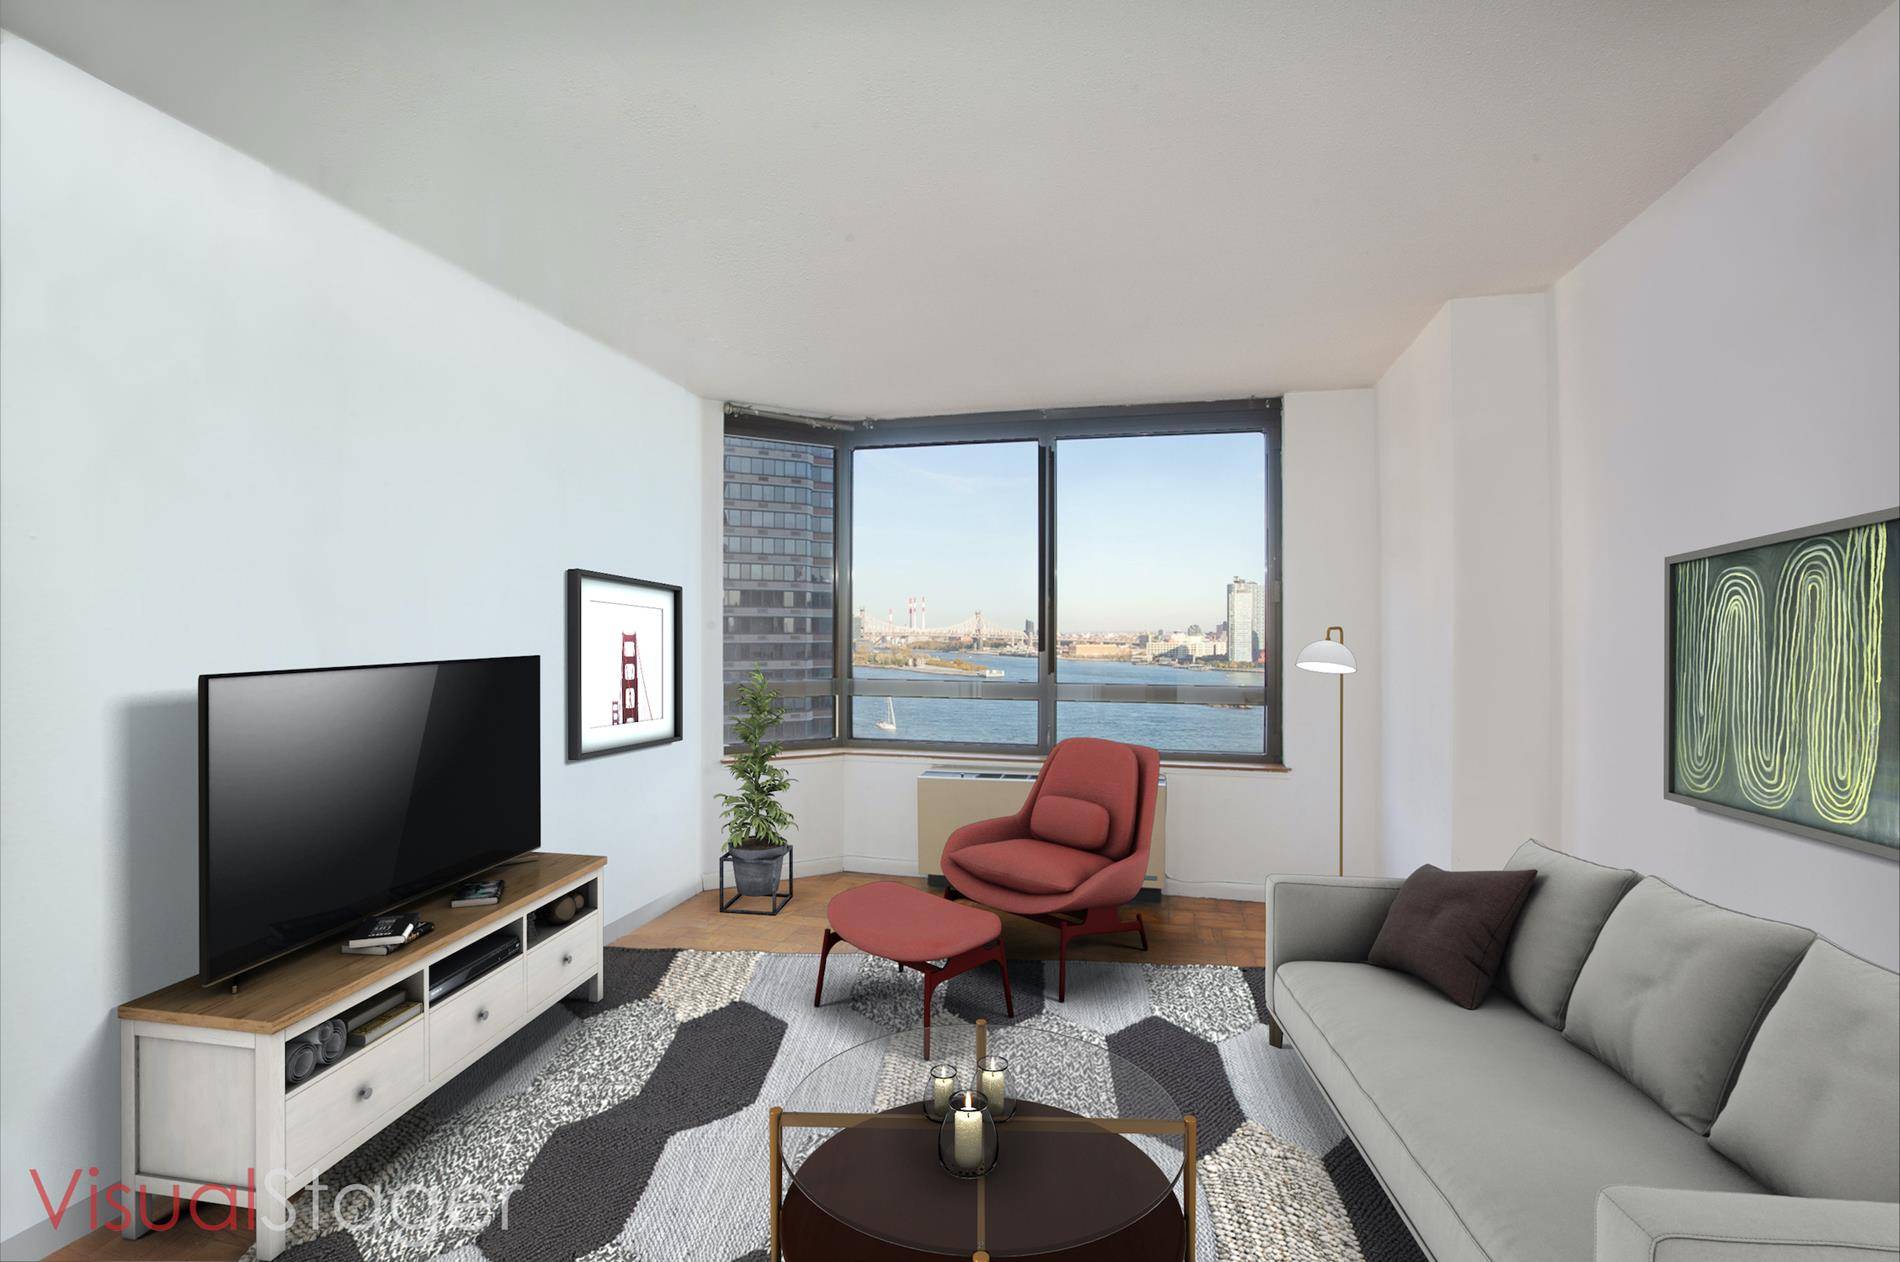 High Floor Unobstructed East River Views Large 2 Beds 2 Full Baths HomeUnit Features Direct East River views Large Bedrooms TWO marble bathrooms Hardwood Floors Open Layout Separate Kitchen Stainless ...